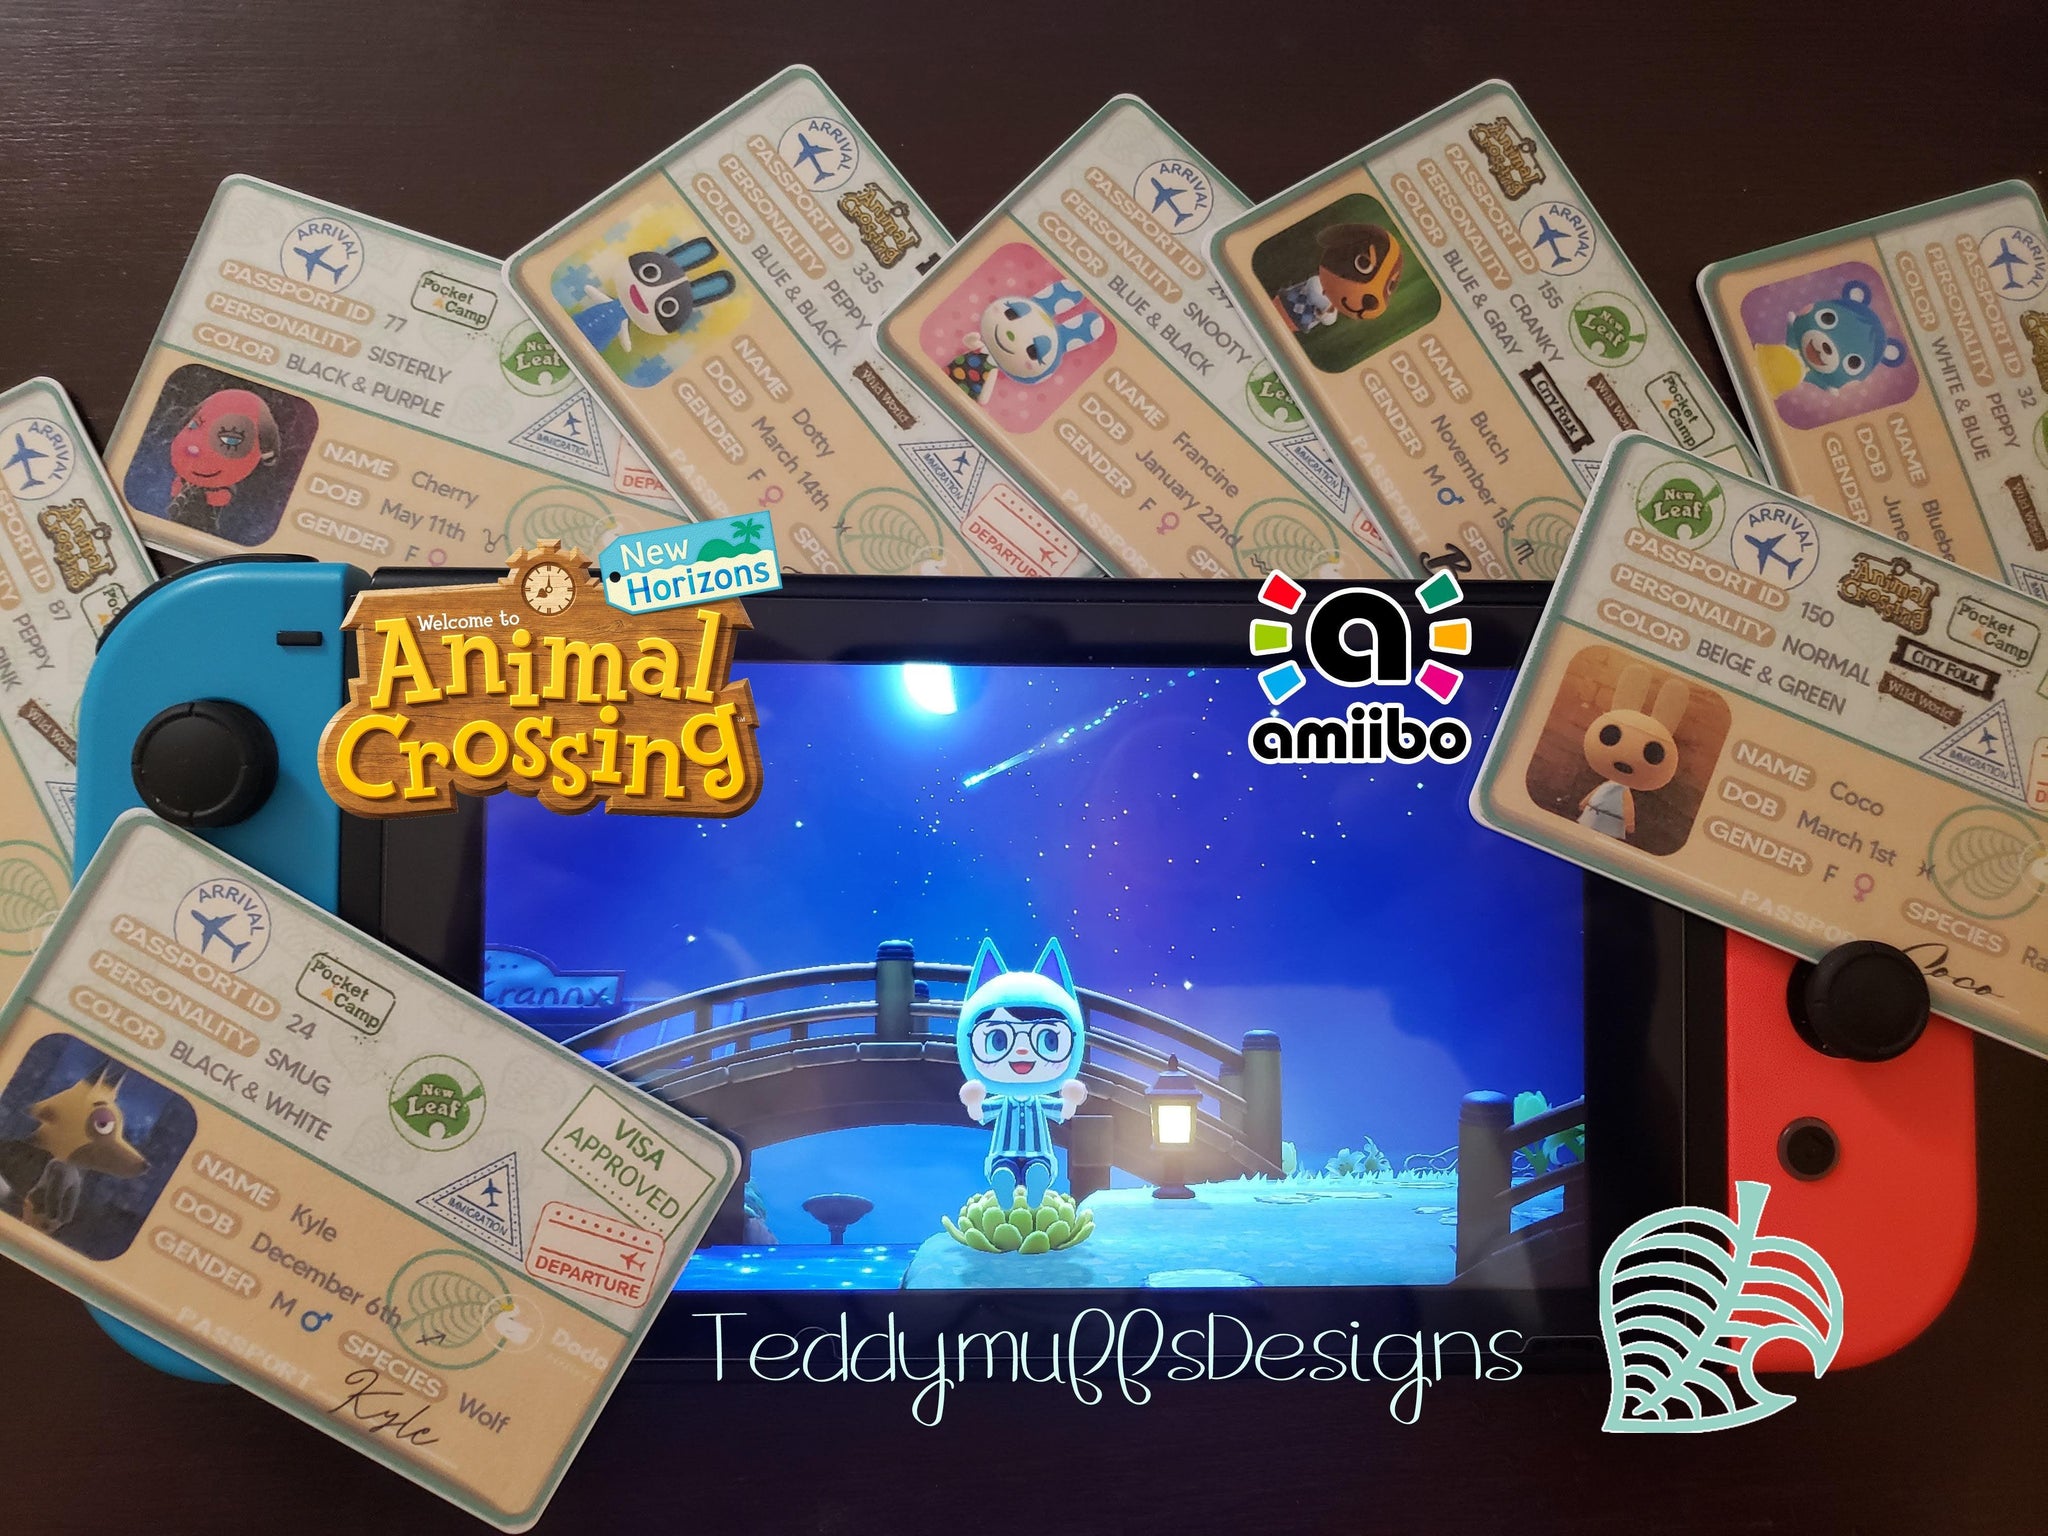 Audie - Villager NFC Card for Animal Crossing New Horizons Amiibo – NFC  Card Store